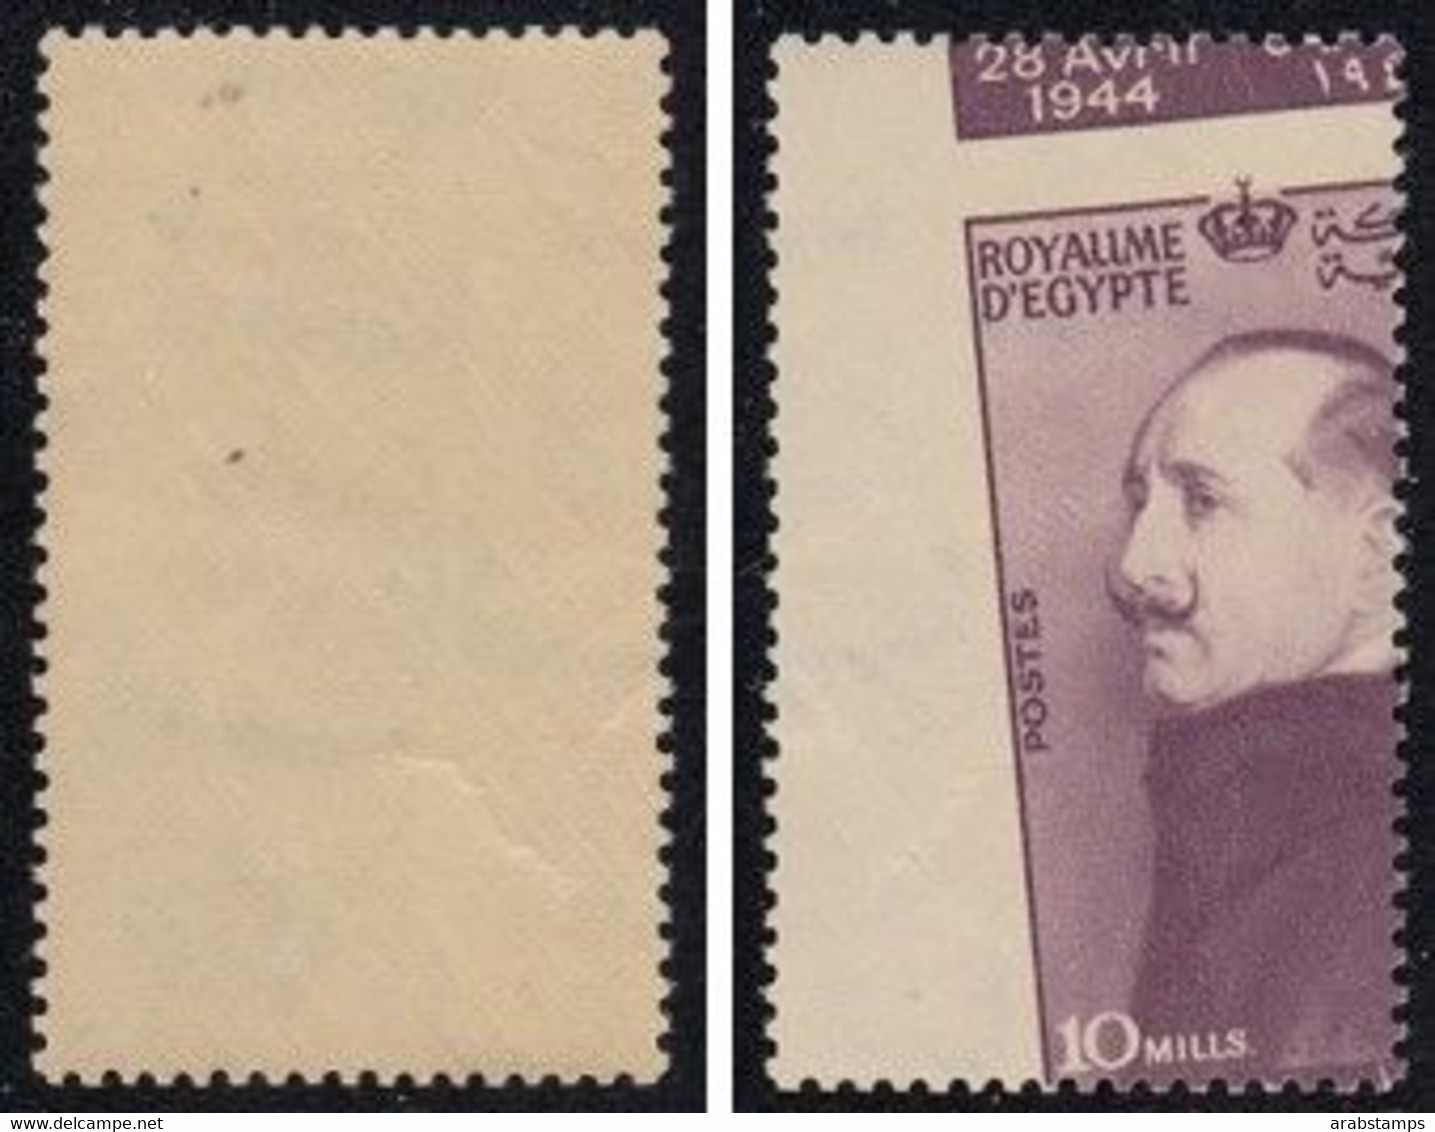 1944 Egypt King Faud 10Mills Royal Perforation Left  Side Of The Sheet With Watermark S.G.286 MNH - Unused Stamps